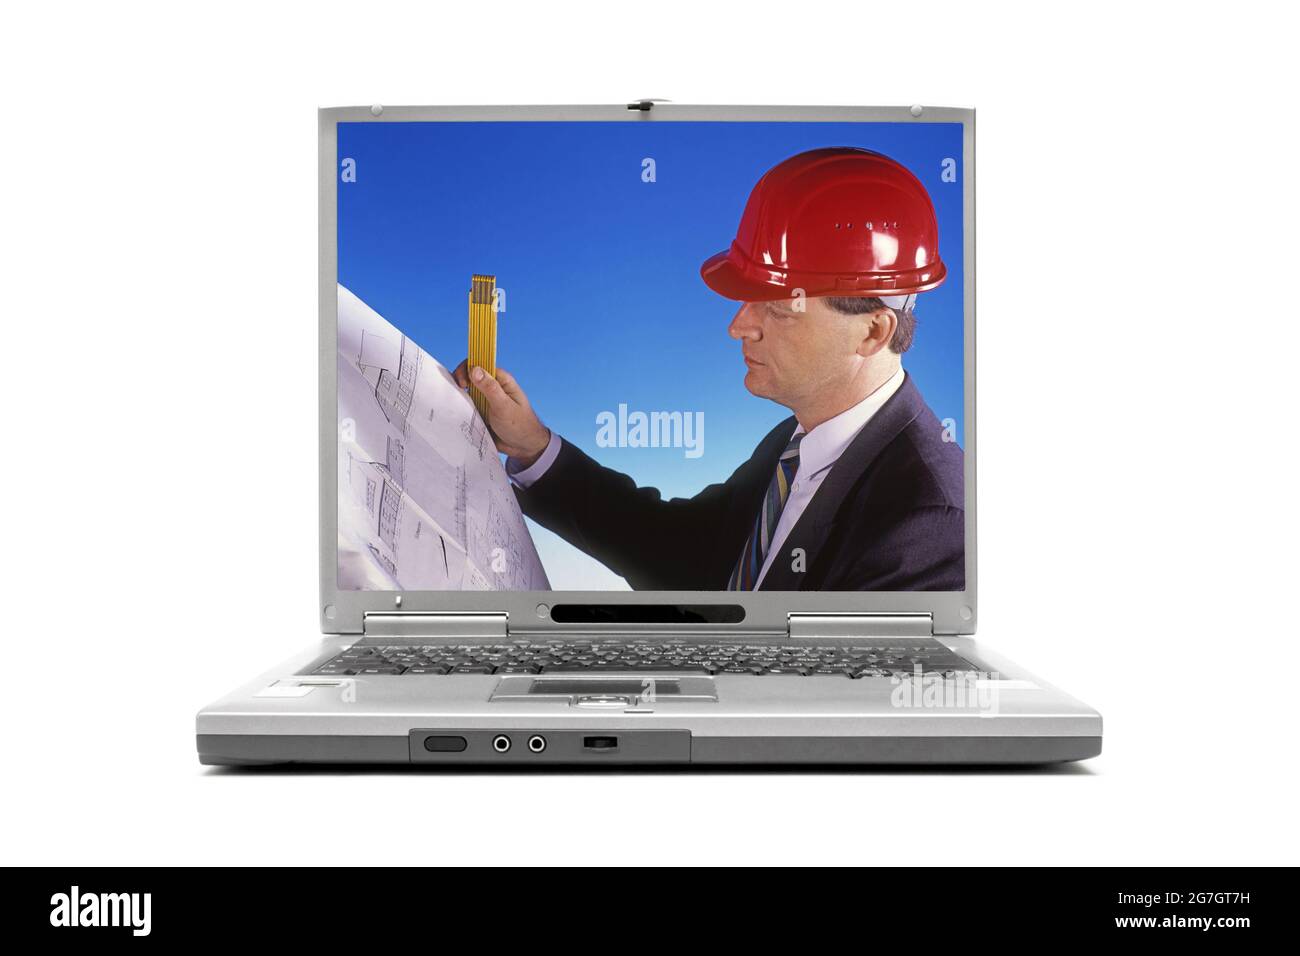 architect with construction helmet on the display of a laptop computer Stock Photo